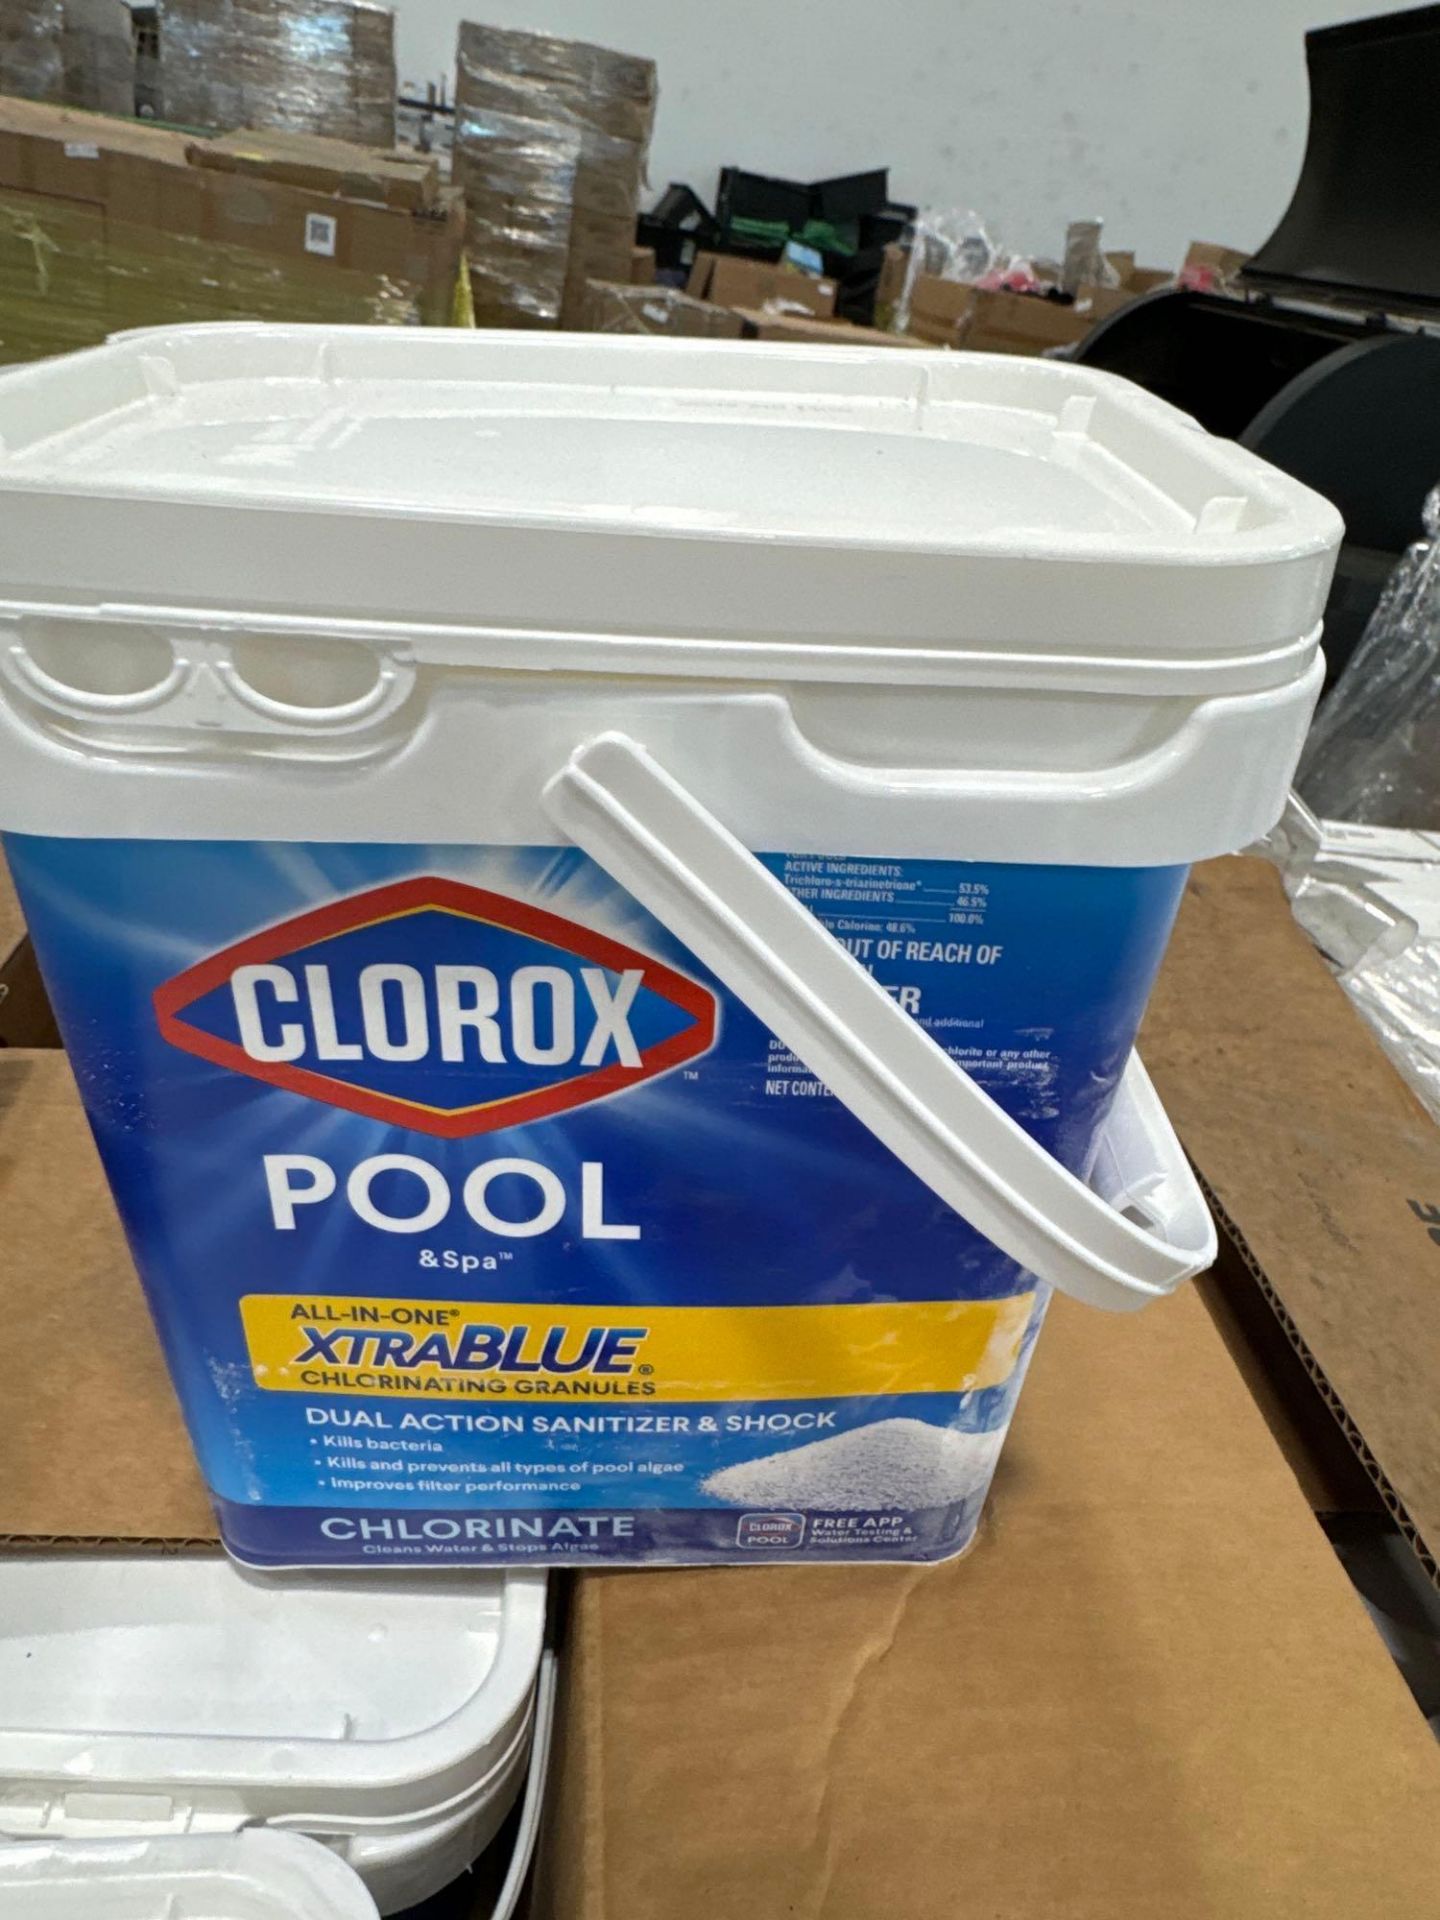 Pallet of Clorox Pool All-in-one Xtrablue Chlorinating Granules - Image 3 of 6